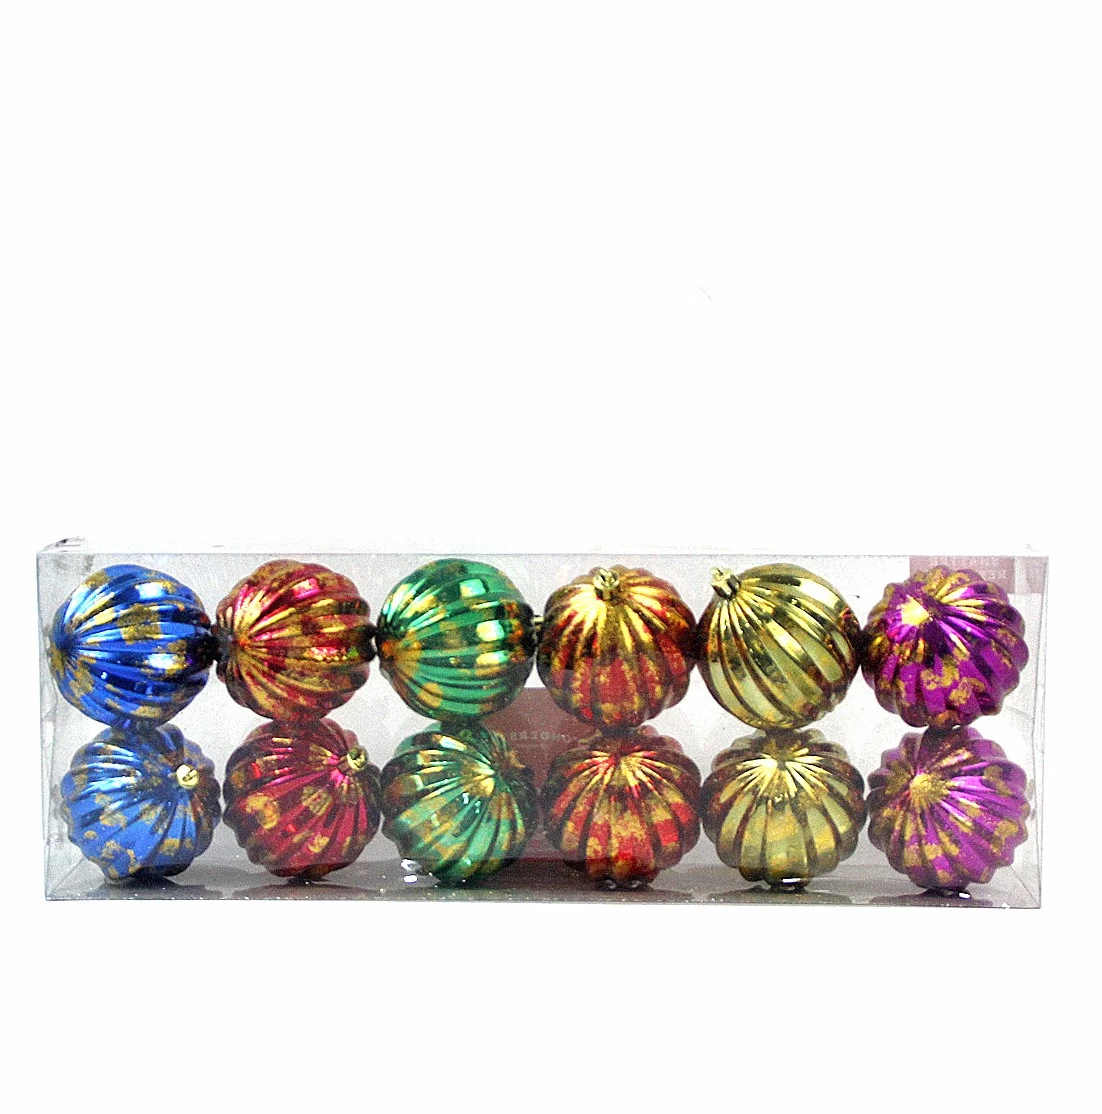 Chiny High quality shatterproof wholesale christmas ball ornament set producent